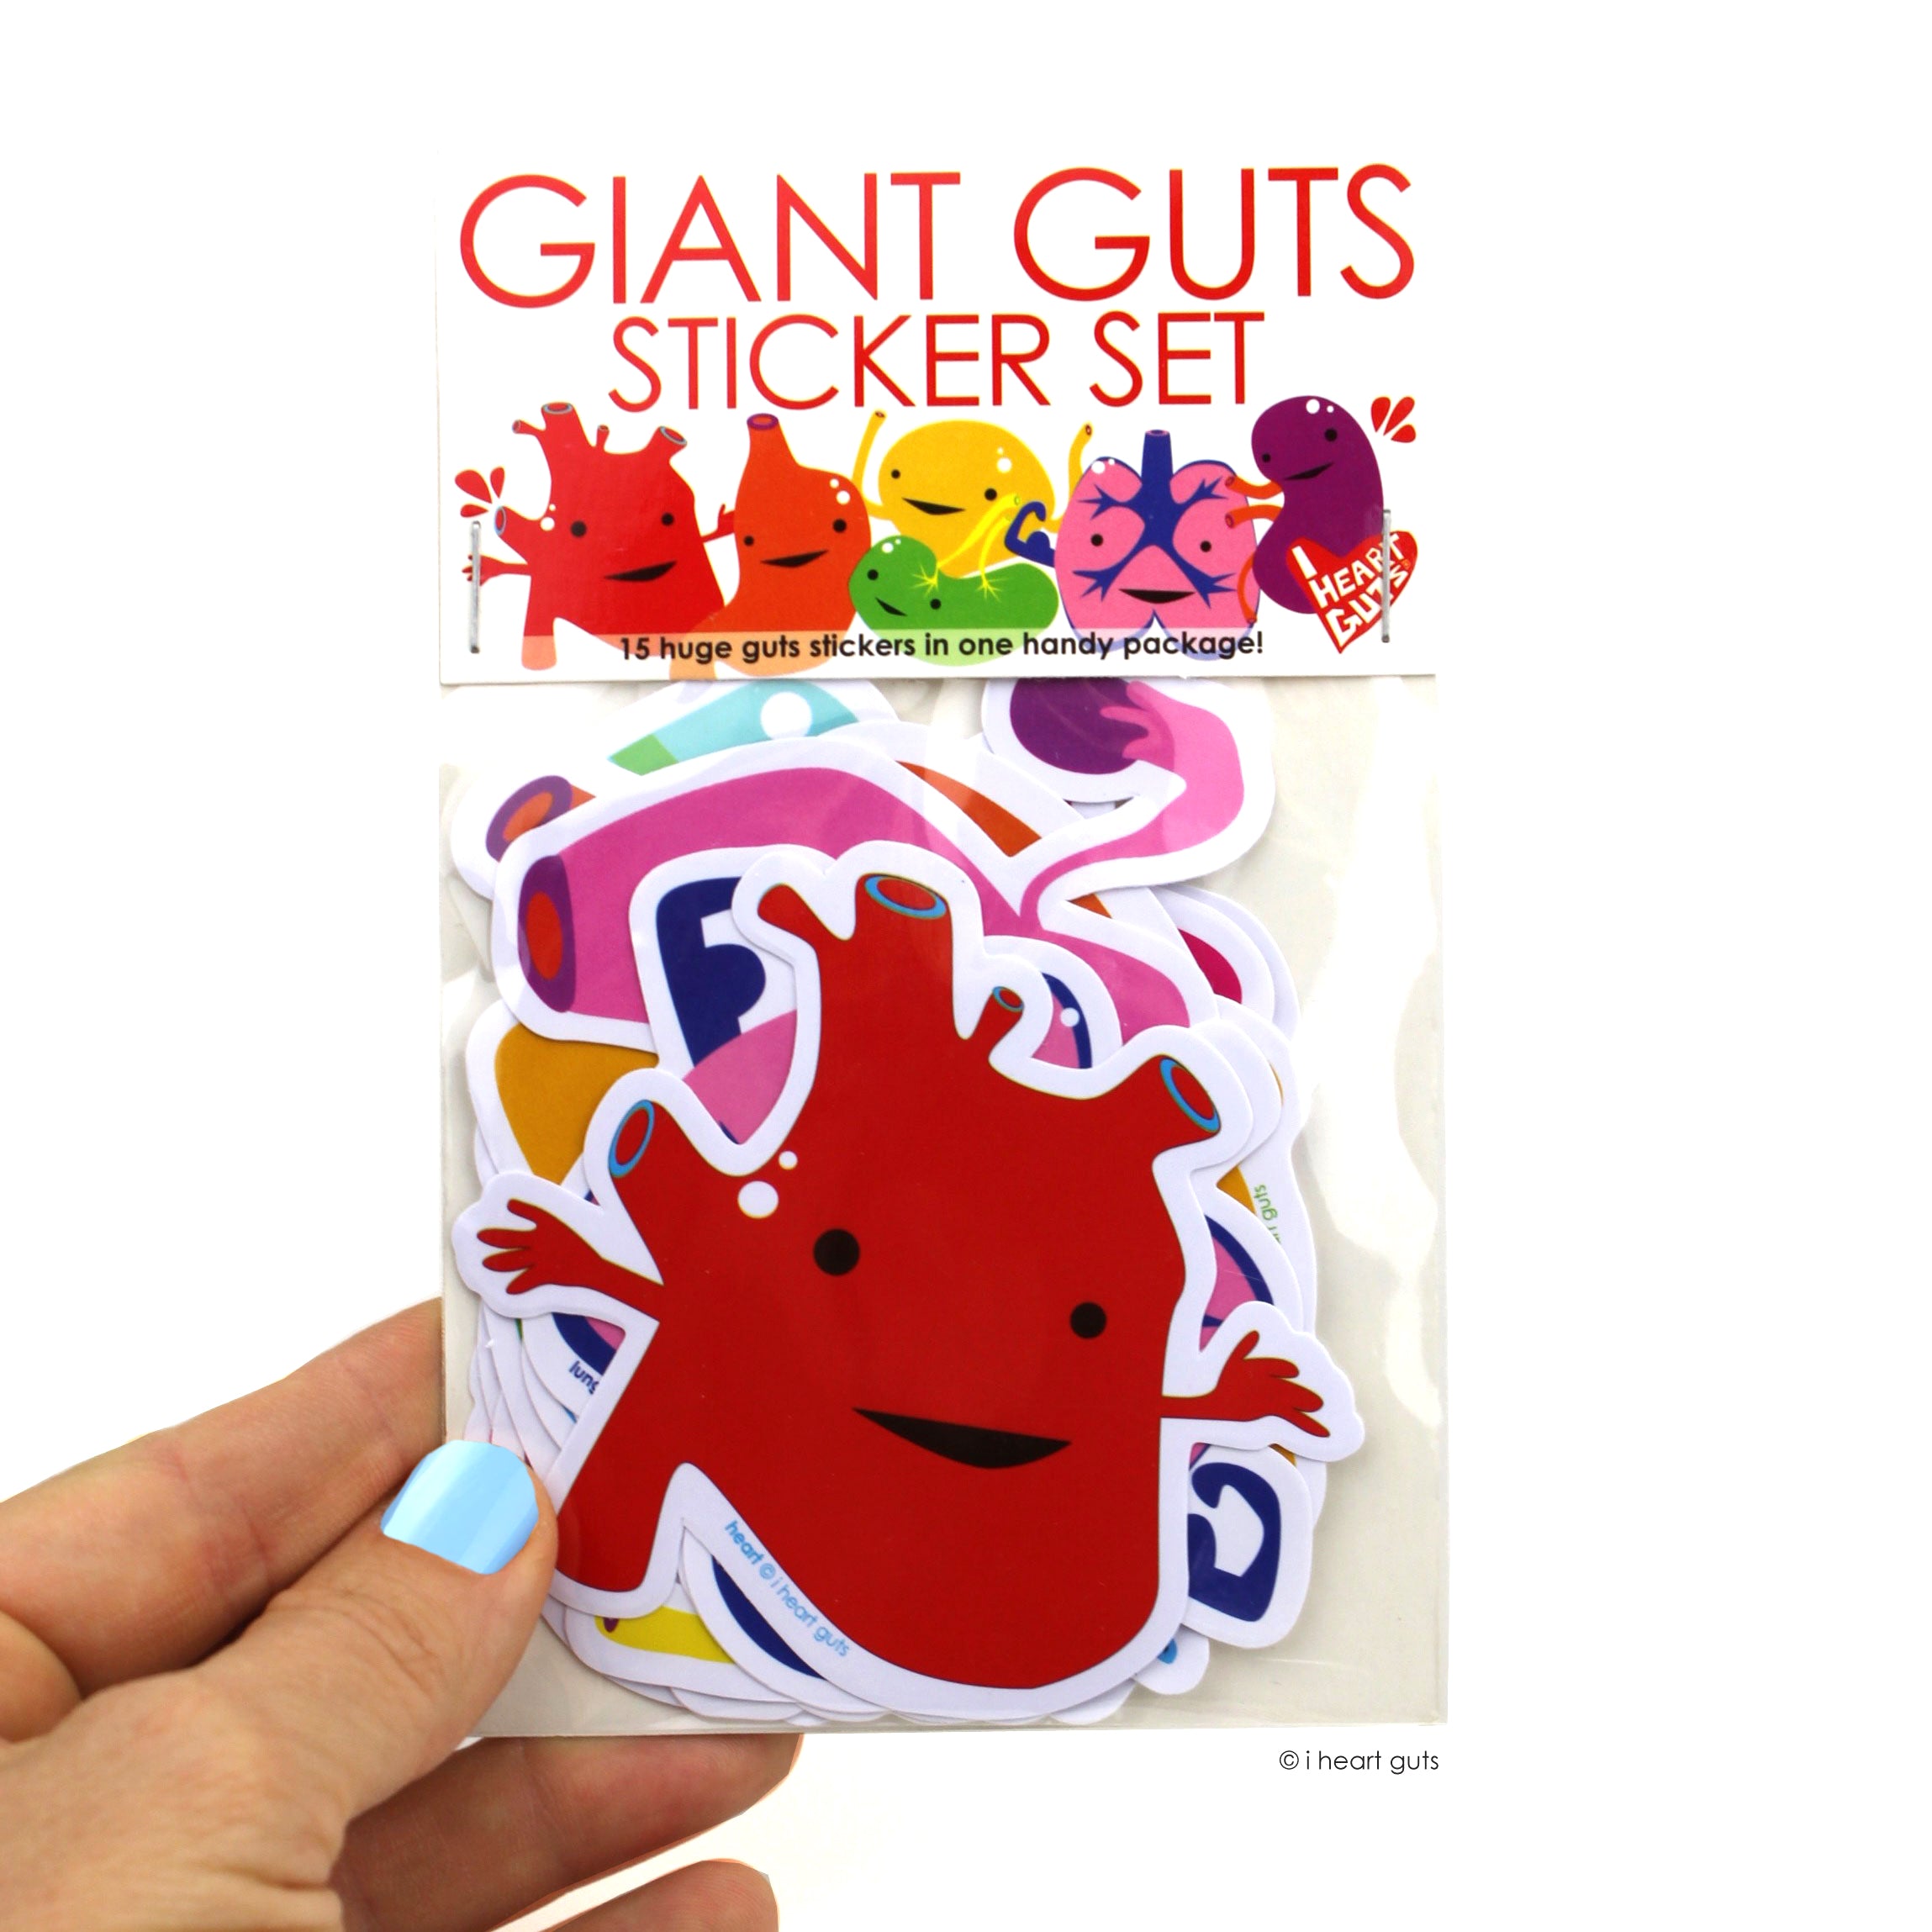 Giant Guts Sticker: Pack of 15